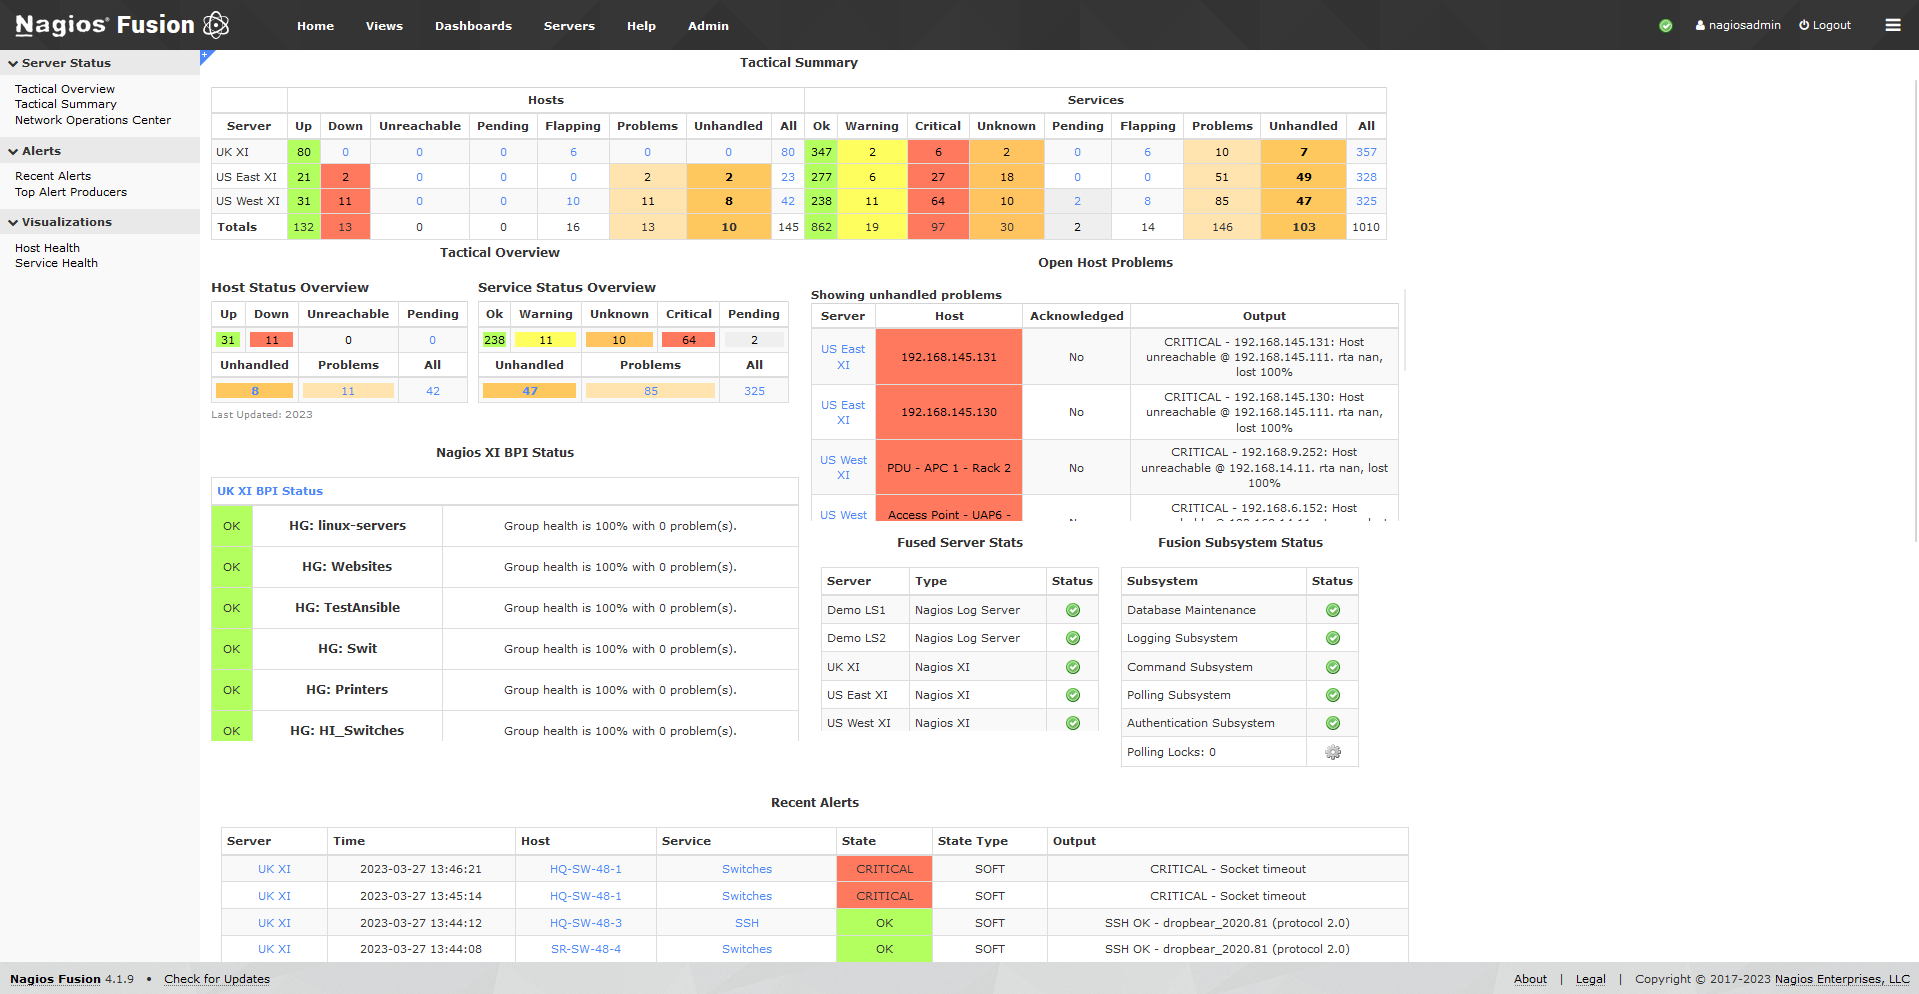 IT Infrastructure Monitoring with Nagios Fusion